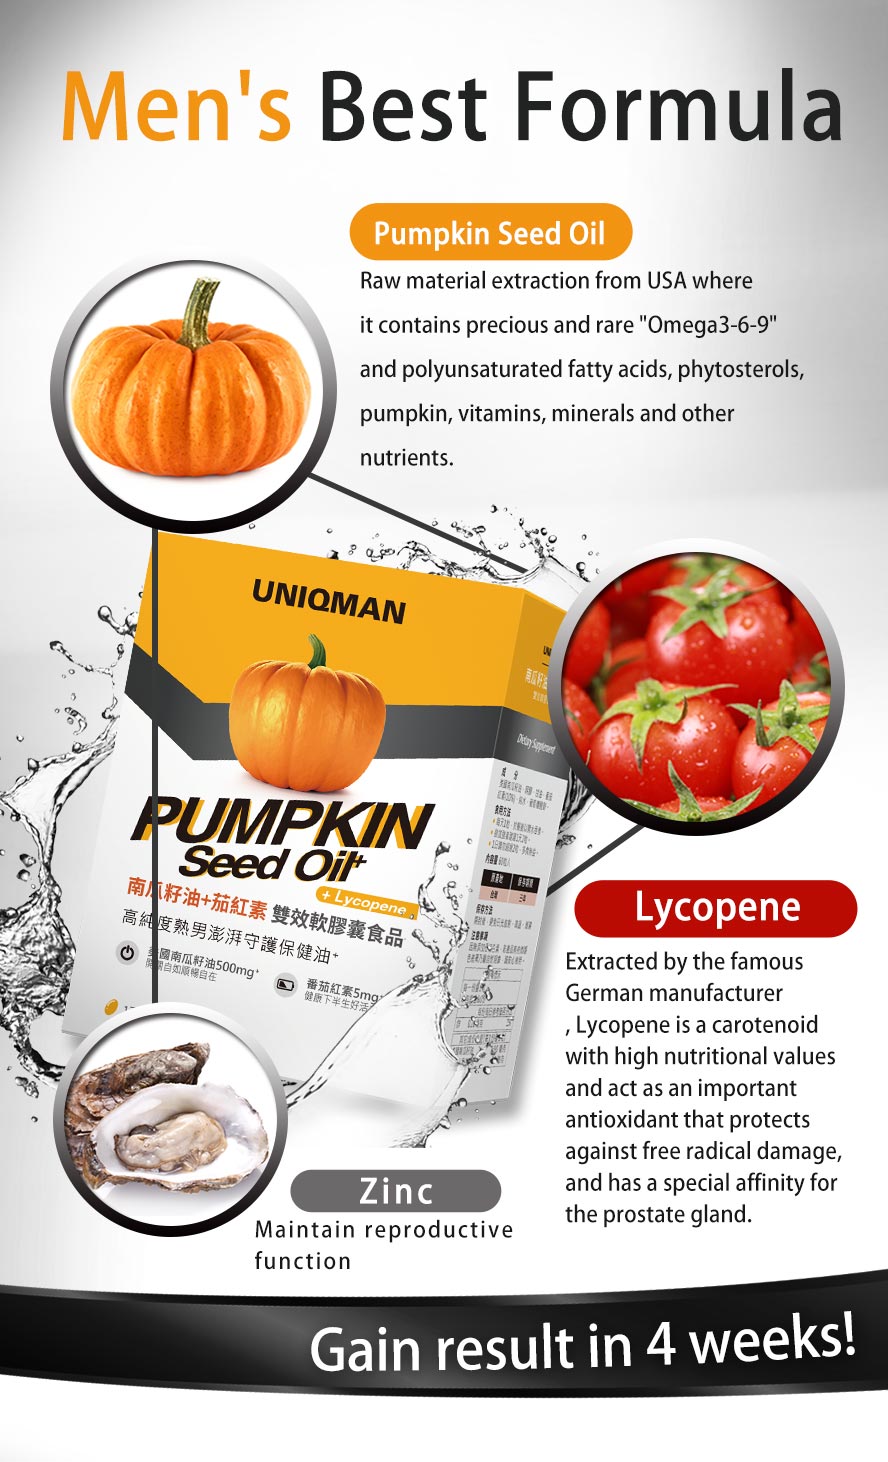 UNIQMAN Pumpkin Seed Oil + Lycopene contains chelated zinc to maintain reproductive function